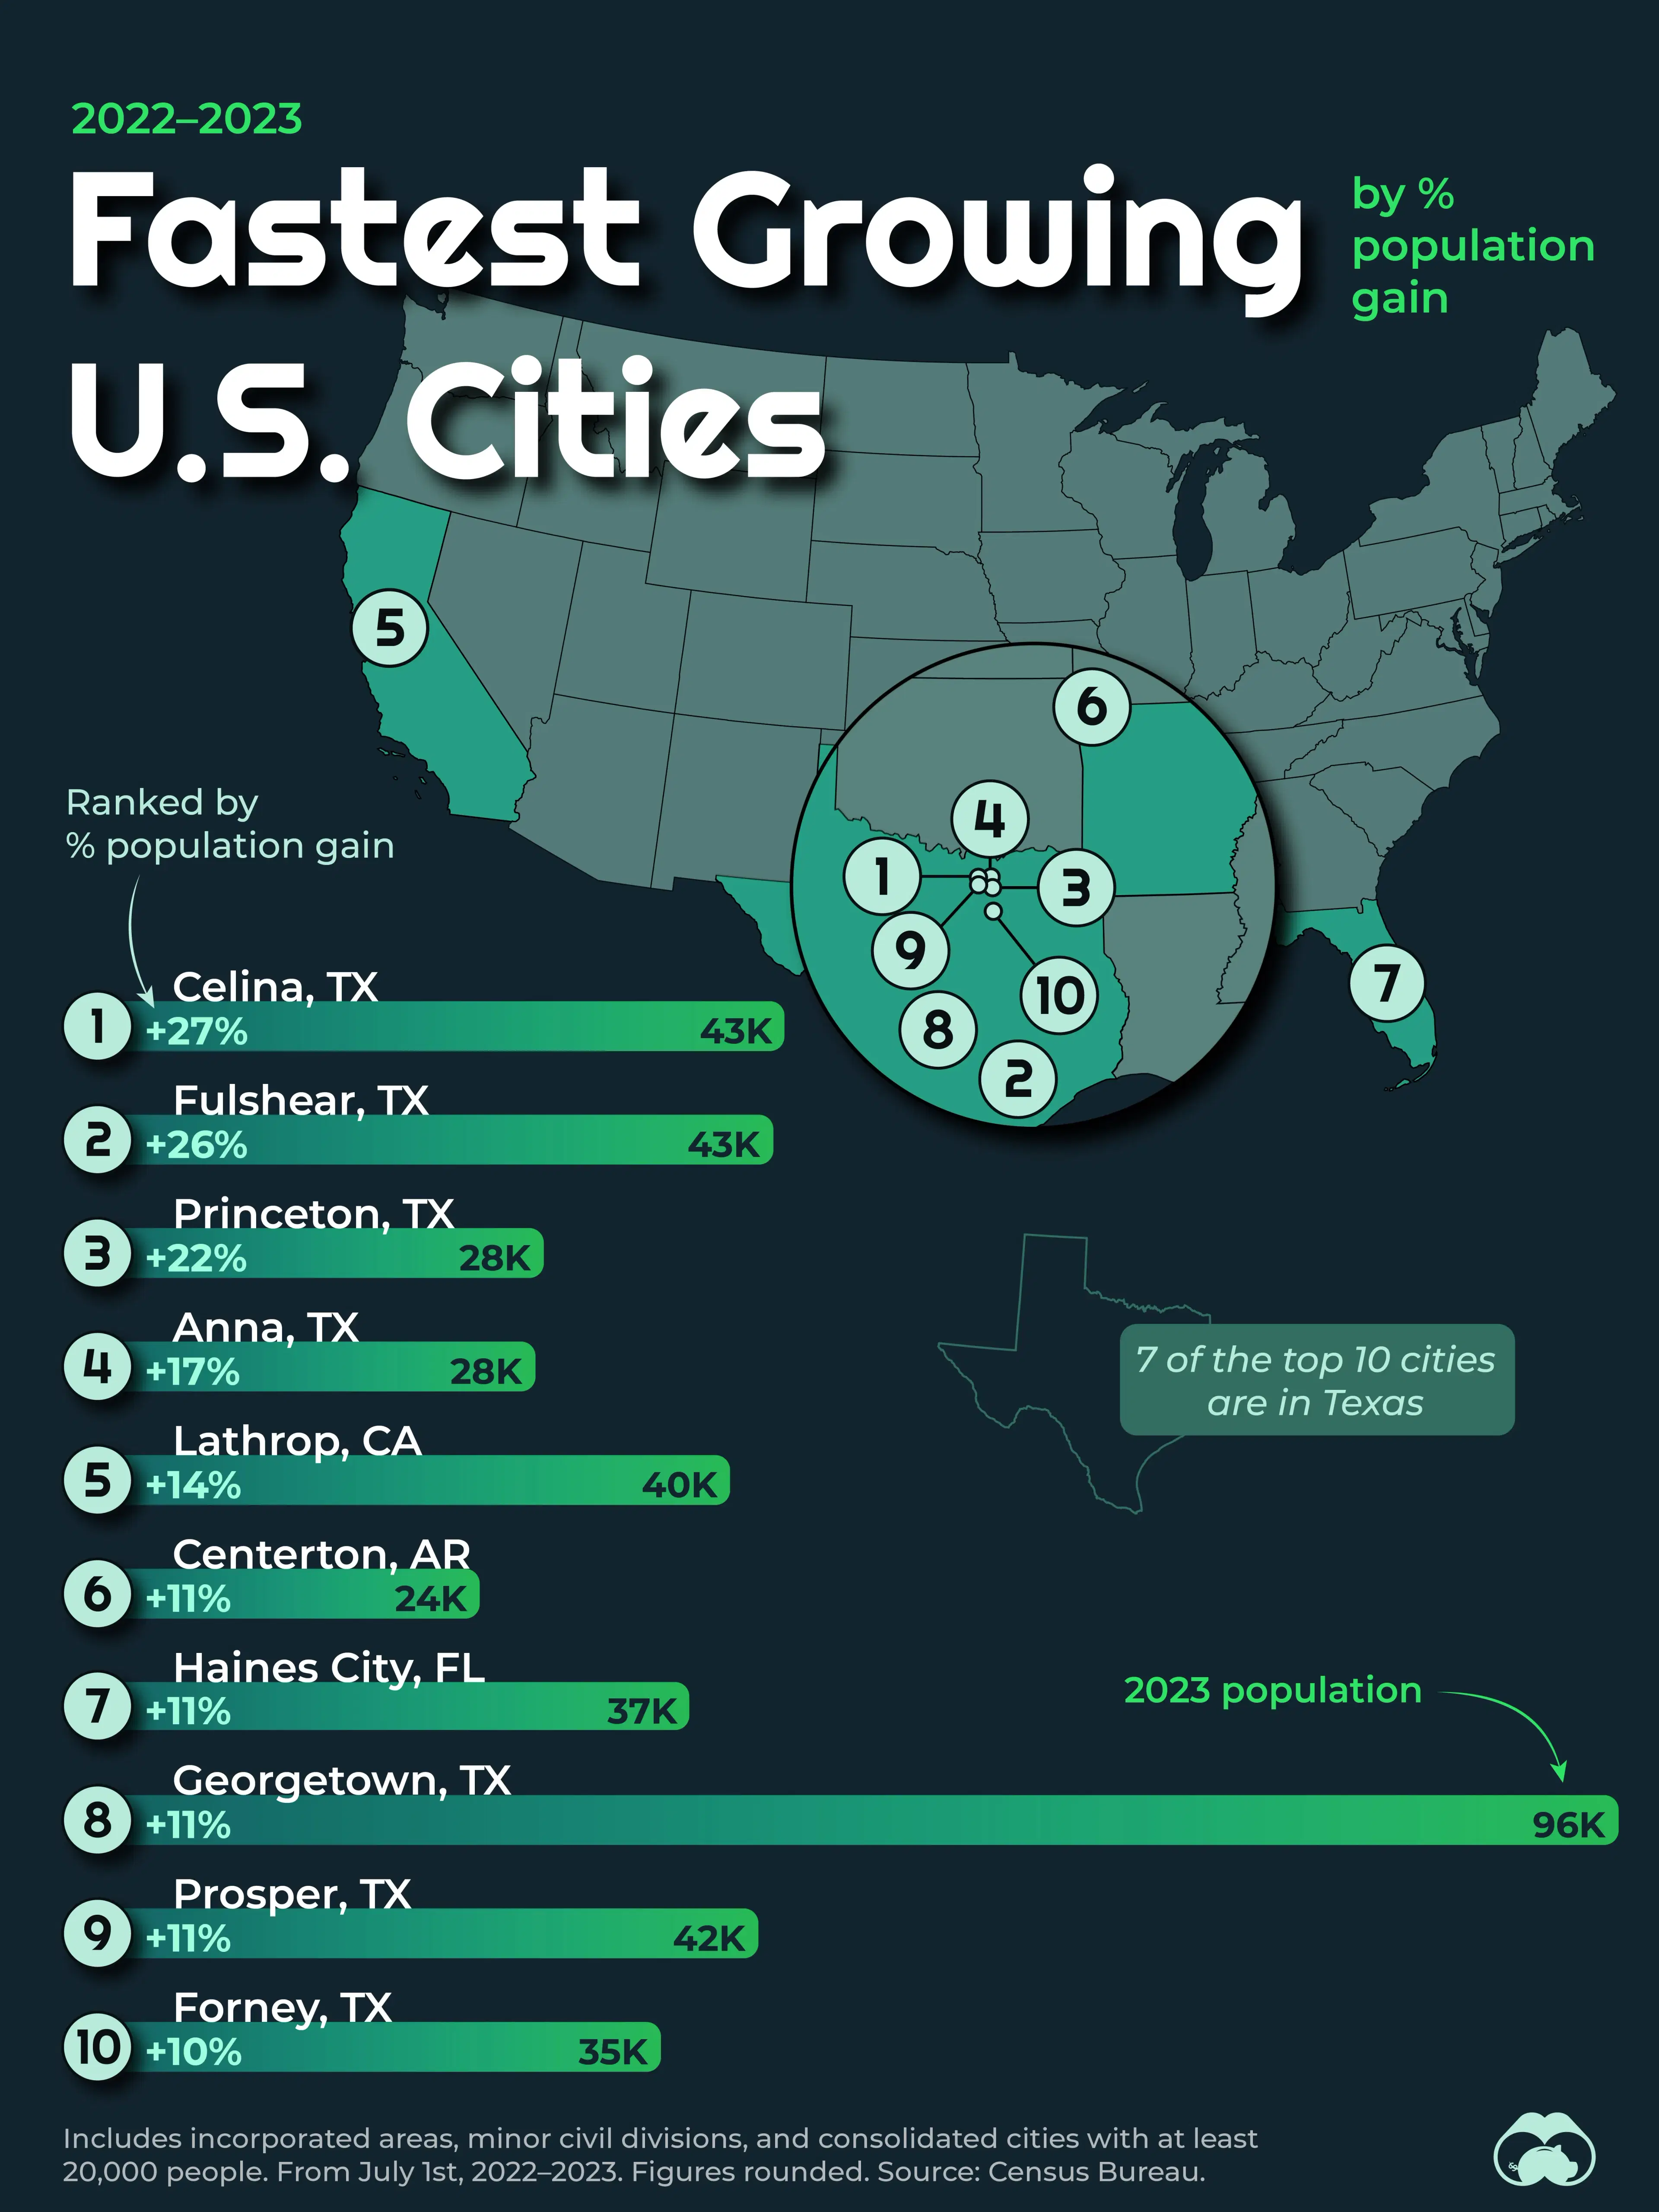 🇺🇸 7 of the Top 10 Fastest-Growing American Cities are in Texas